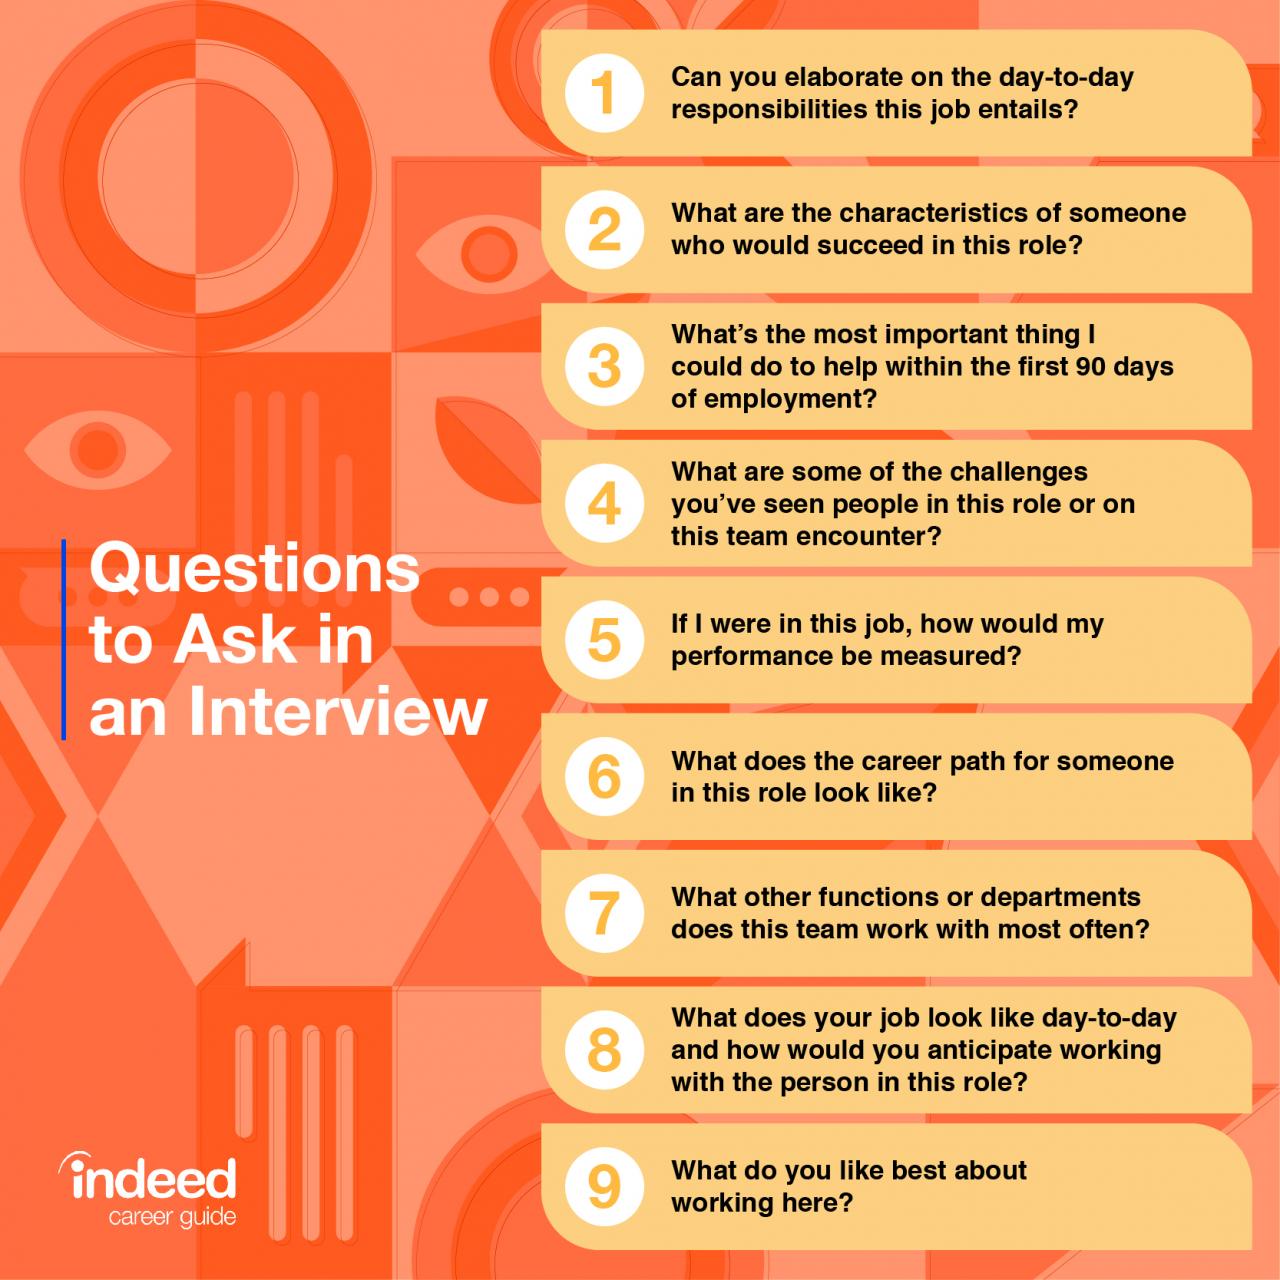 Good questions to ask in an interview for a job